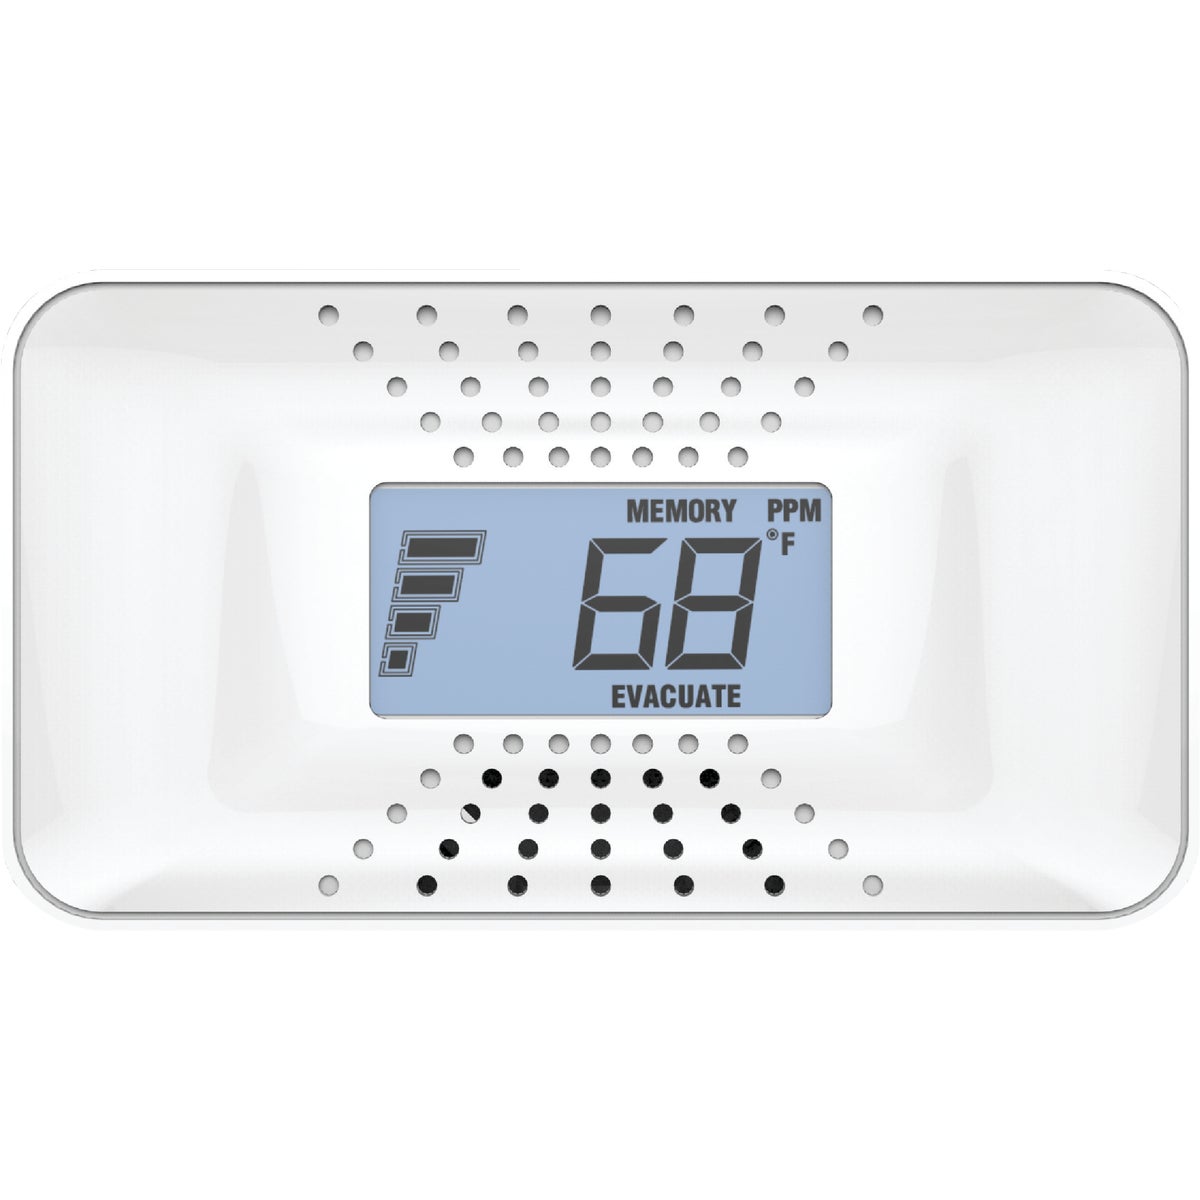 Item 502523, Carbon monoxide alarm with 10-year battery and digital temperature display 